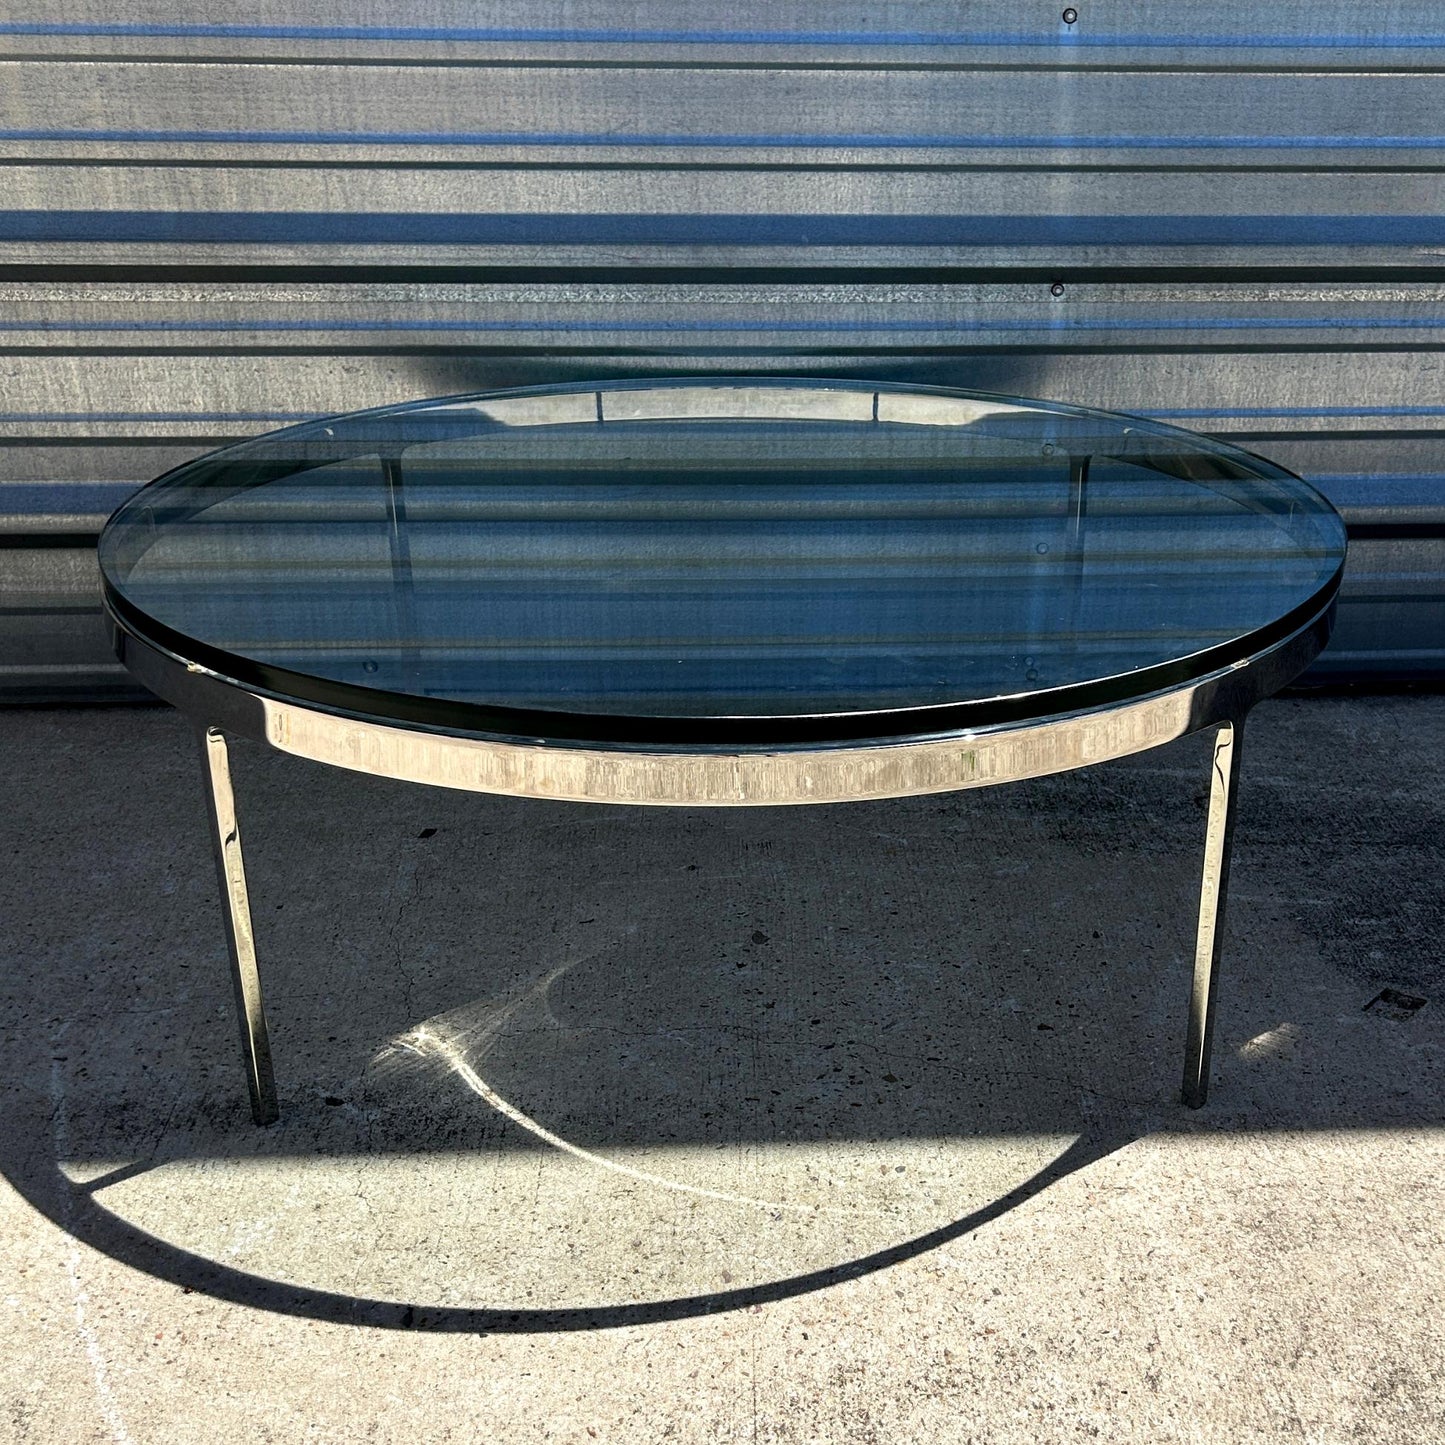 1970's Nicos Zographos Round Glass Coffee Table w/ Polished Stainless Steel Base